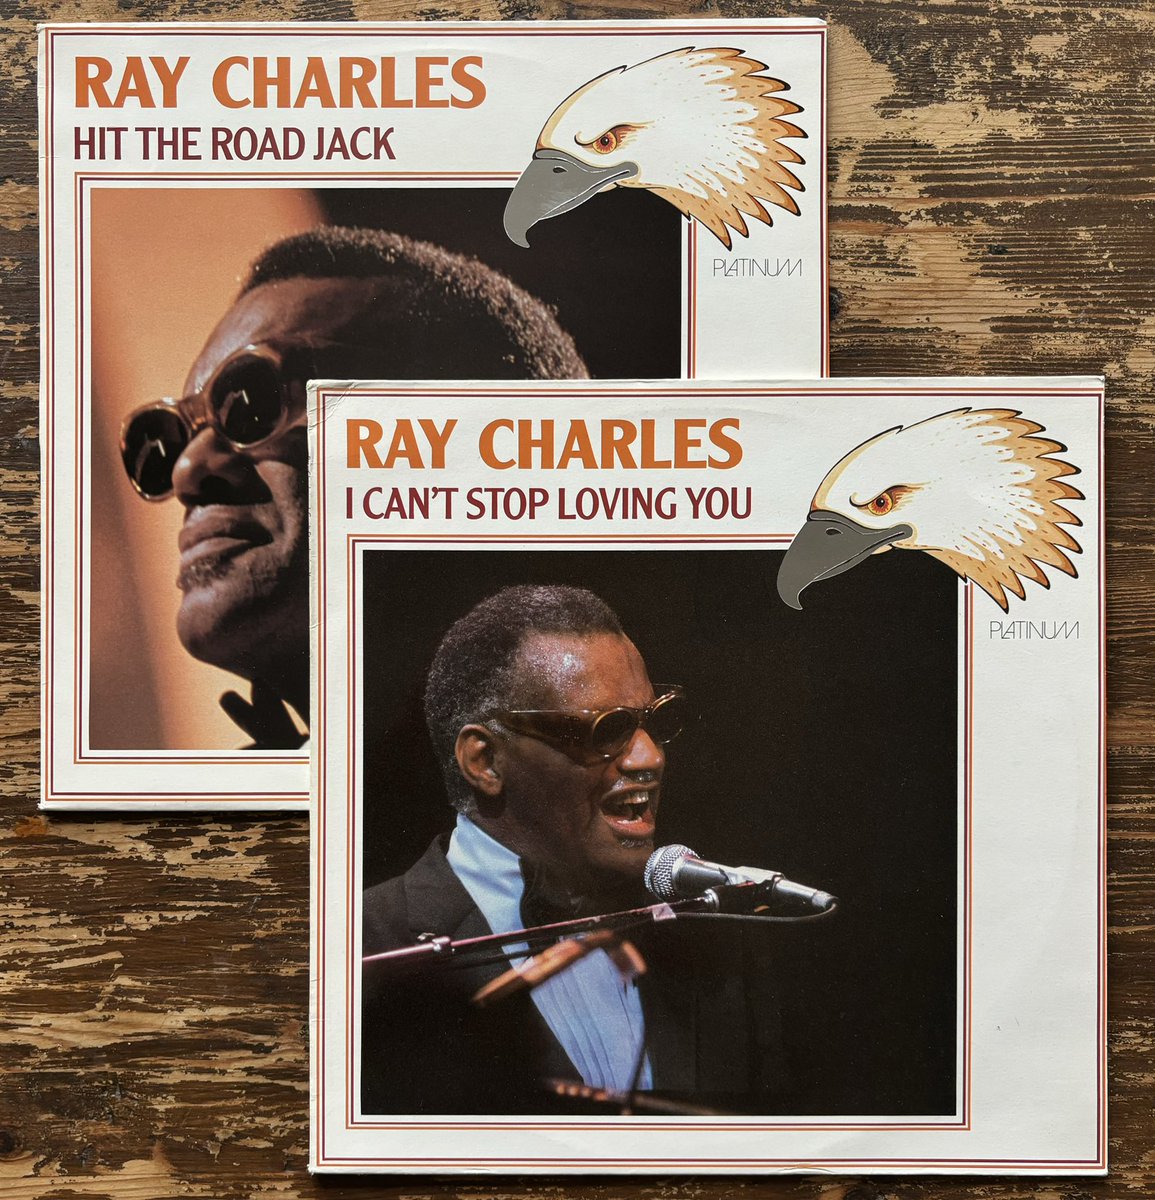 Loads of wallet-friendly soul LPs just in, prepping for our May record fairs, including these two comps from the legendary #raycharles #hittheroadjack #icantstoplovingyou #soul #rhythmandblues #southsiderecordsglasgow instagram.com/p/C6awYjmtZt6/…